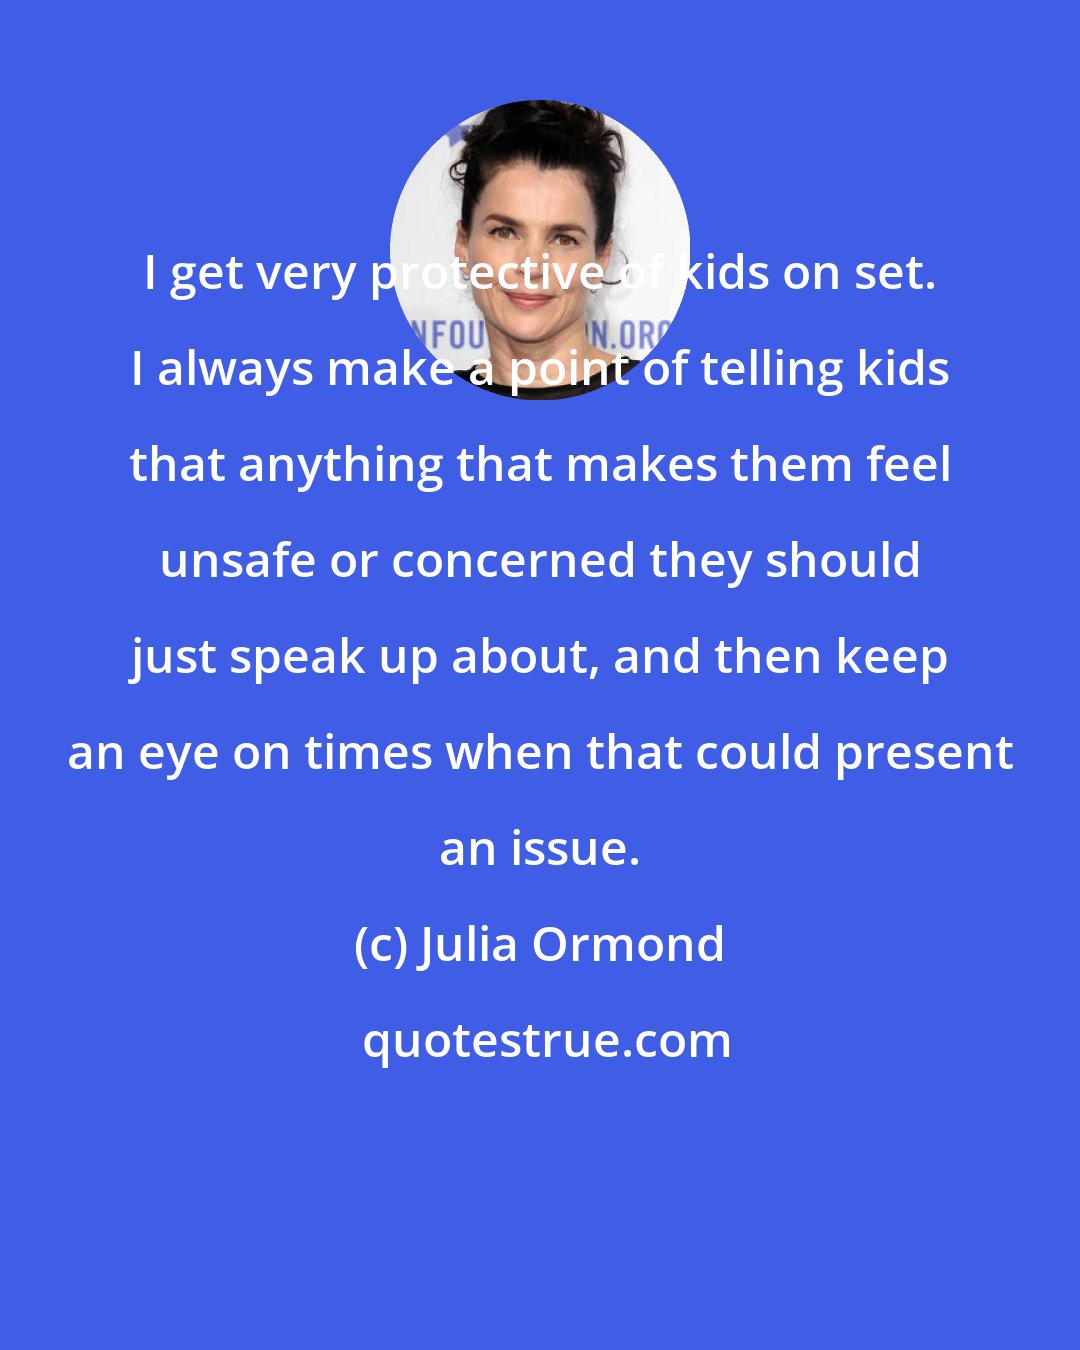 Julia Ormond: I get very protective of kids on set. I always make a point of telling kids that anything that makes them feel unsafe or concerned they should just speak up about, and then keep an eye on times when that could present an issue.